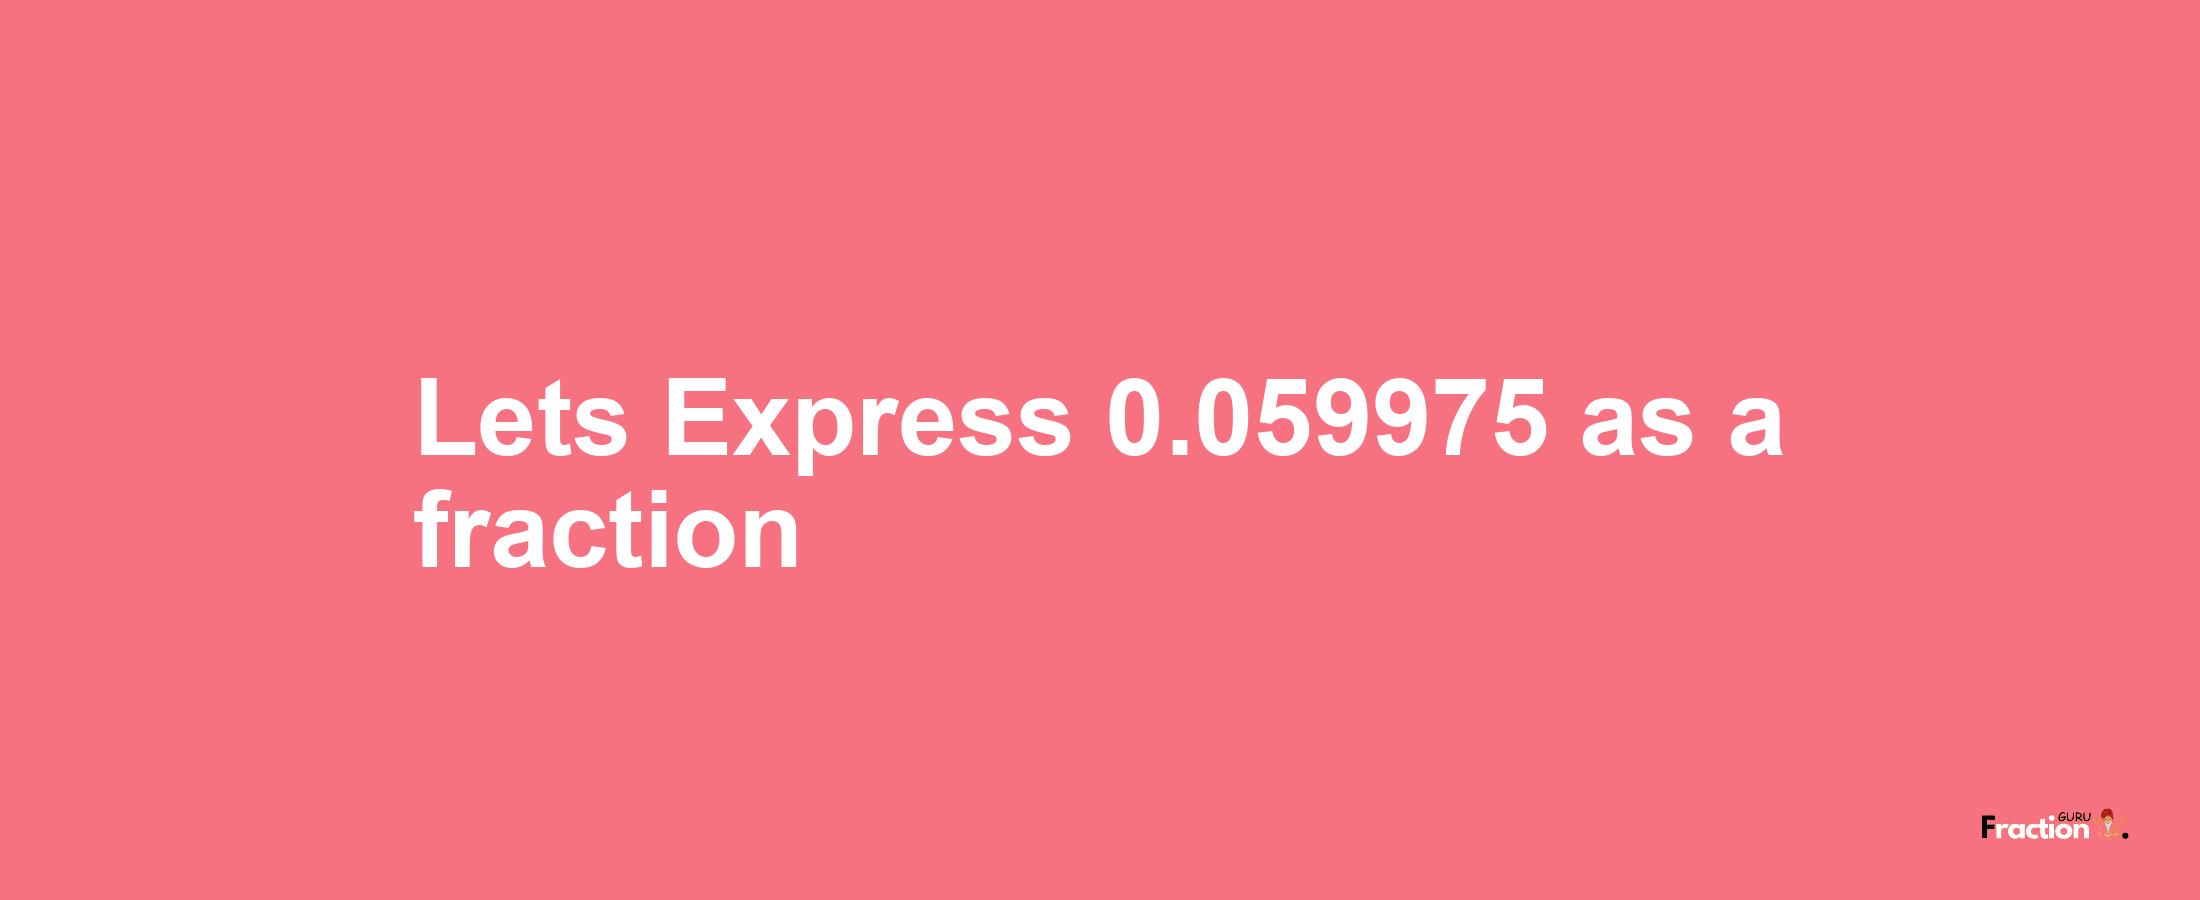 Lets Express 0.059975 as afraction